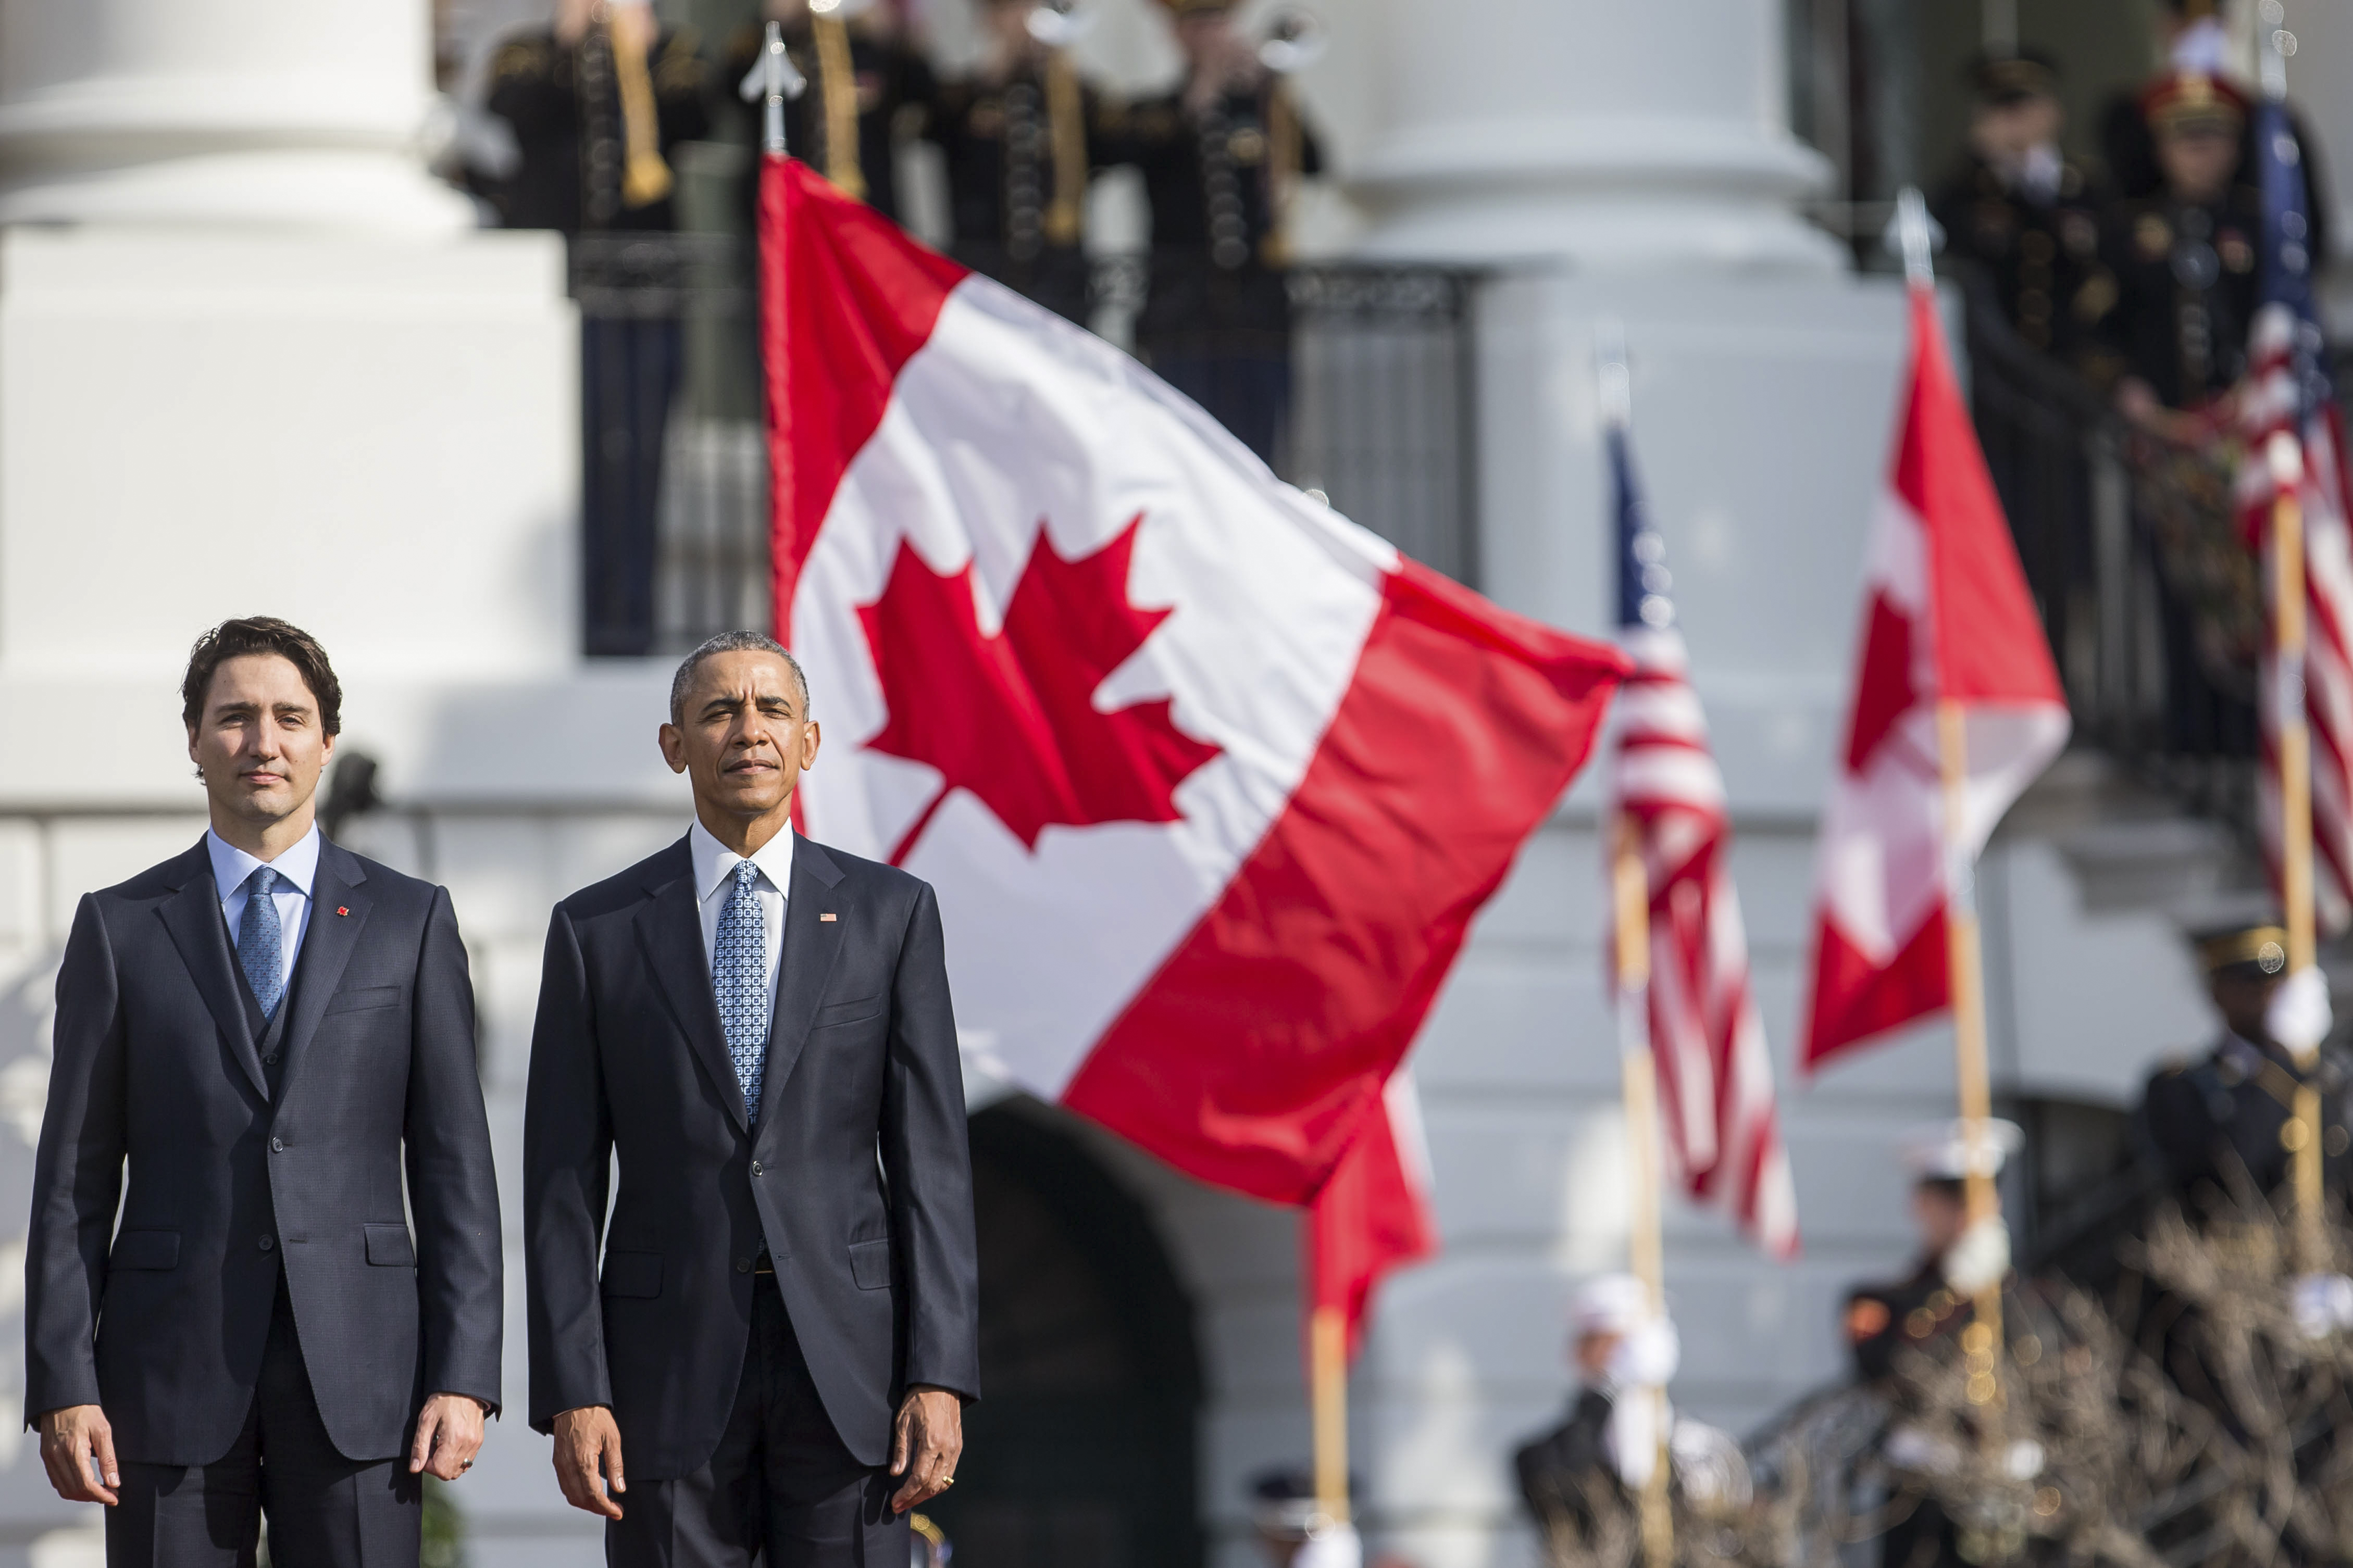 President Barack Obama and Canadian Prime Minister Justin Trudeau during a state arrival ceremony on the South Lawn of the White House, in Washington, March 10, 2015. Garden Collective, a creative agency in Toronto, spurred a viral social media campaign, calling on Canadians to give pep talks to their friends across the border, assuring them that America is great. (Zach Gibson/The New York Times)